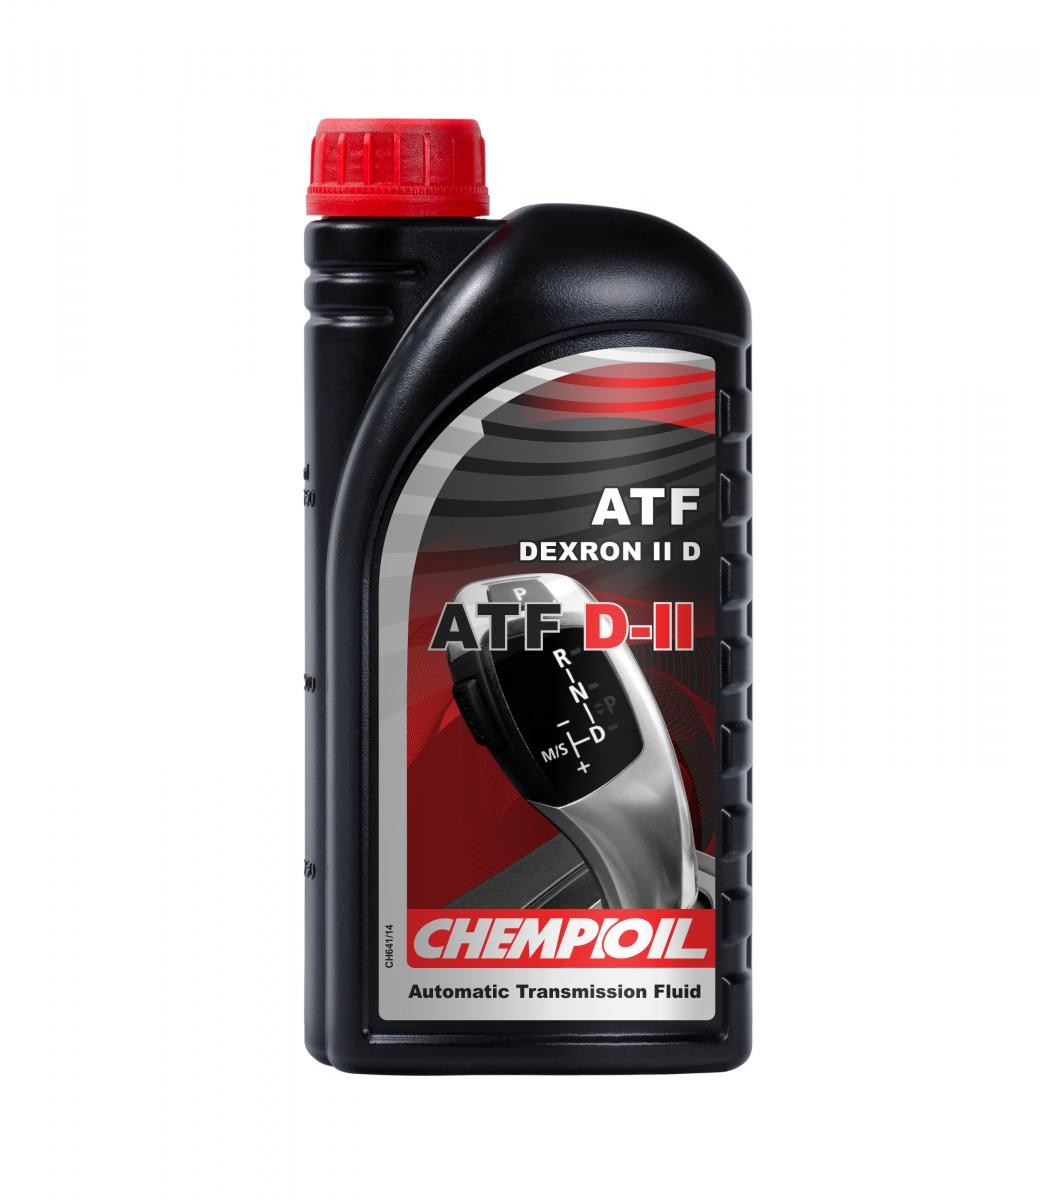 Opel ASCONA Propshafts and differentials parts - Automatic transmission fluid CHEMPIOIL CH8901-1